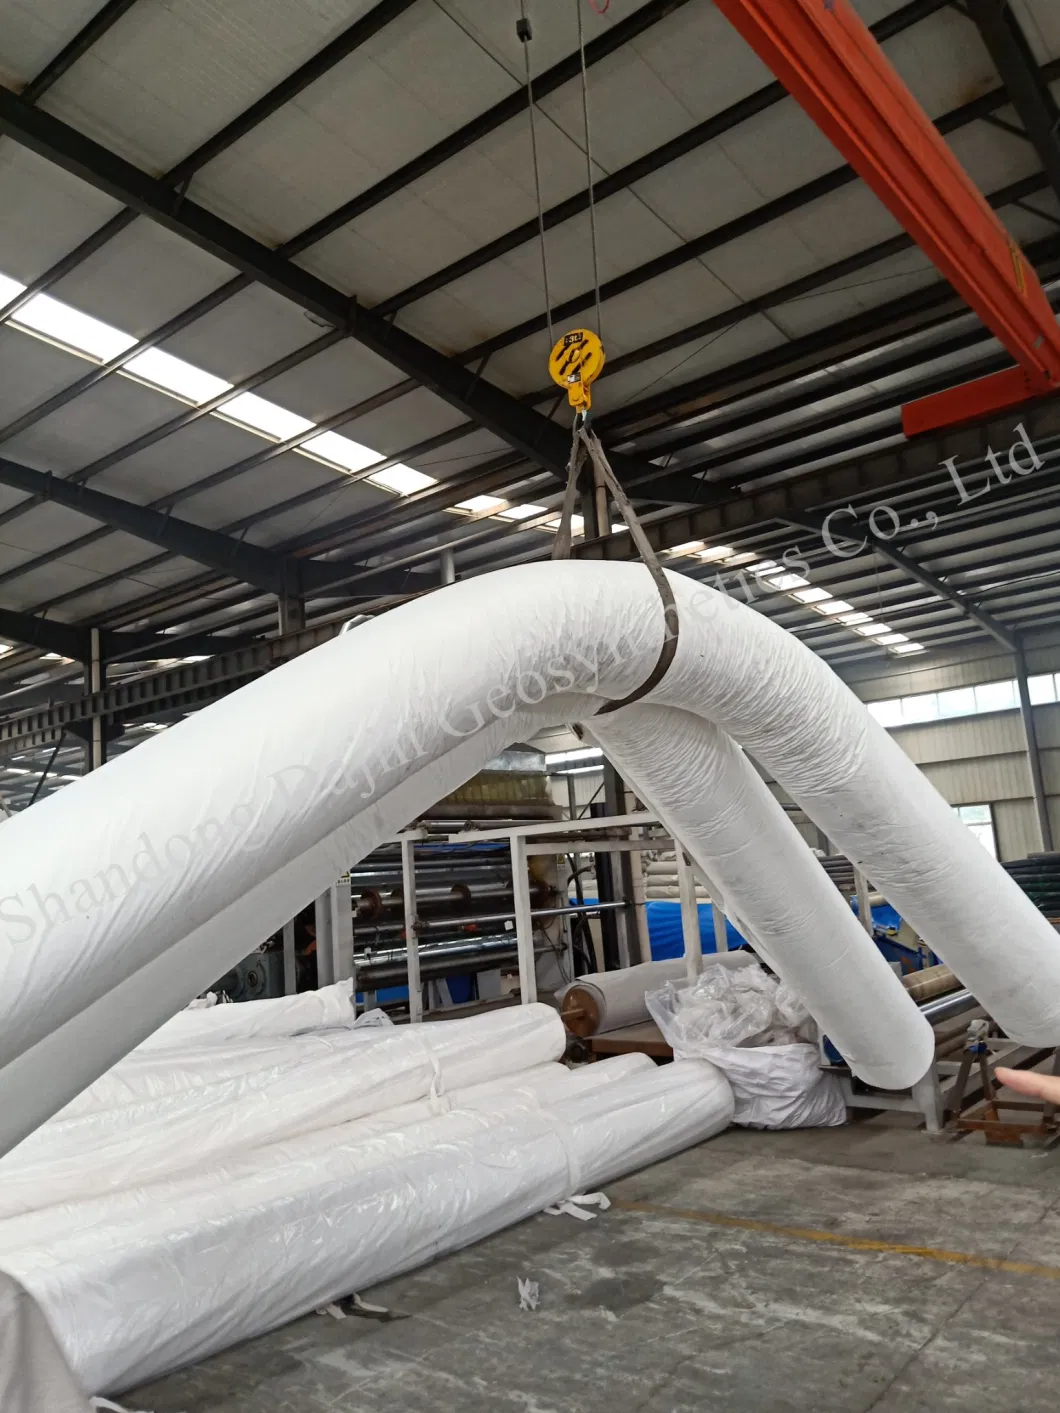 PP/Pet Non-Woven Geotextile 500G/M2 Filter Fabric for Retaining Wall